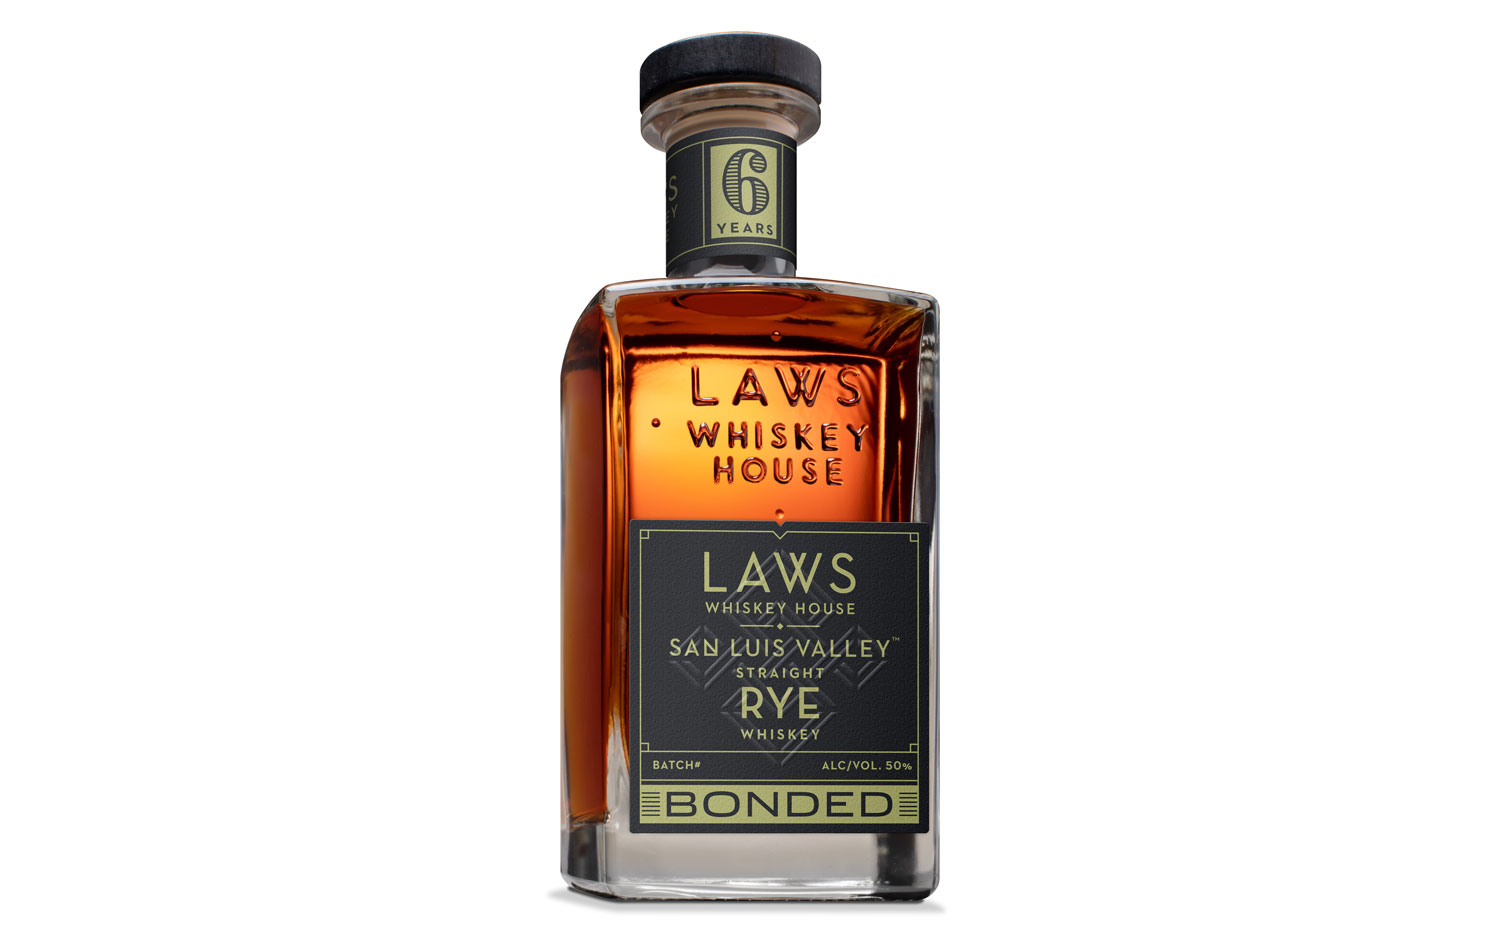 Laws Whiskey’s Bonded San Luis Valley Straight Rye was the category winner for American Rye Whiskey